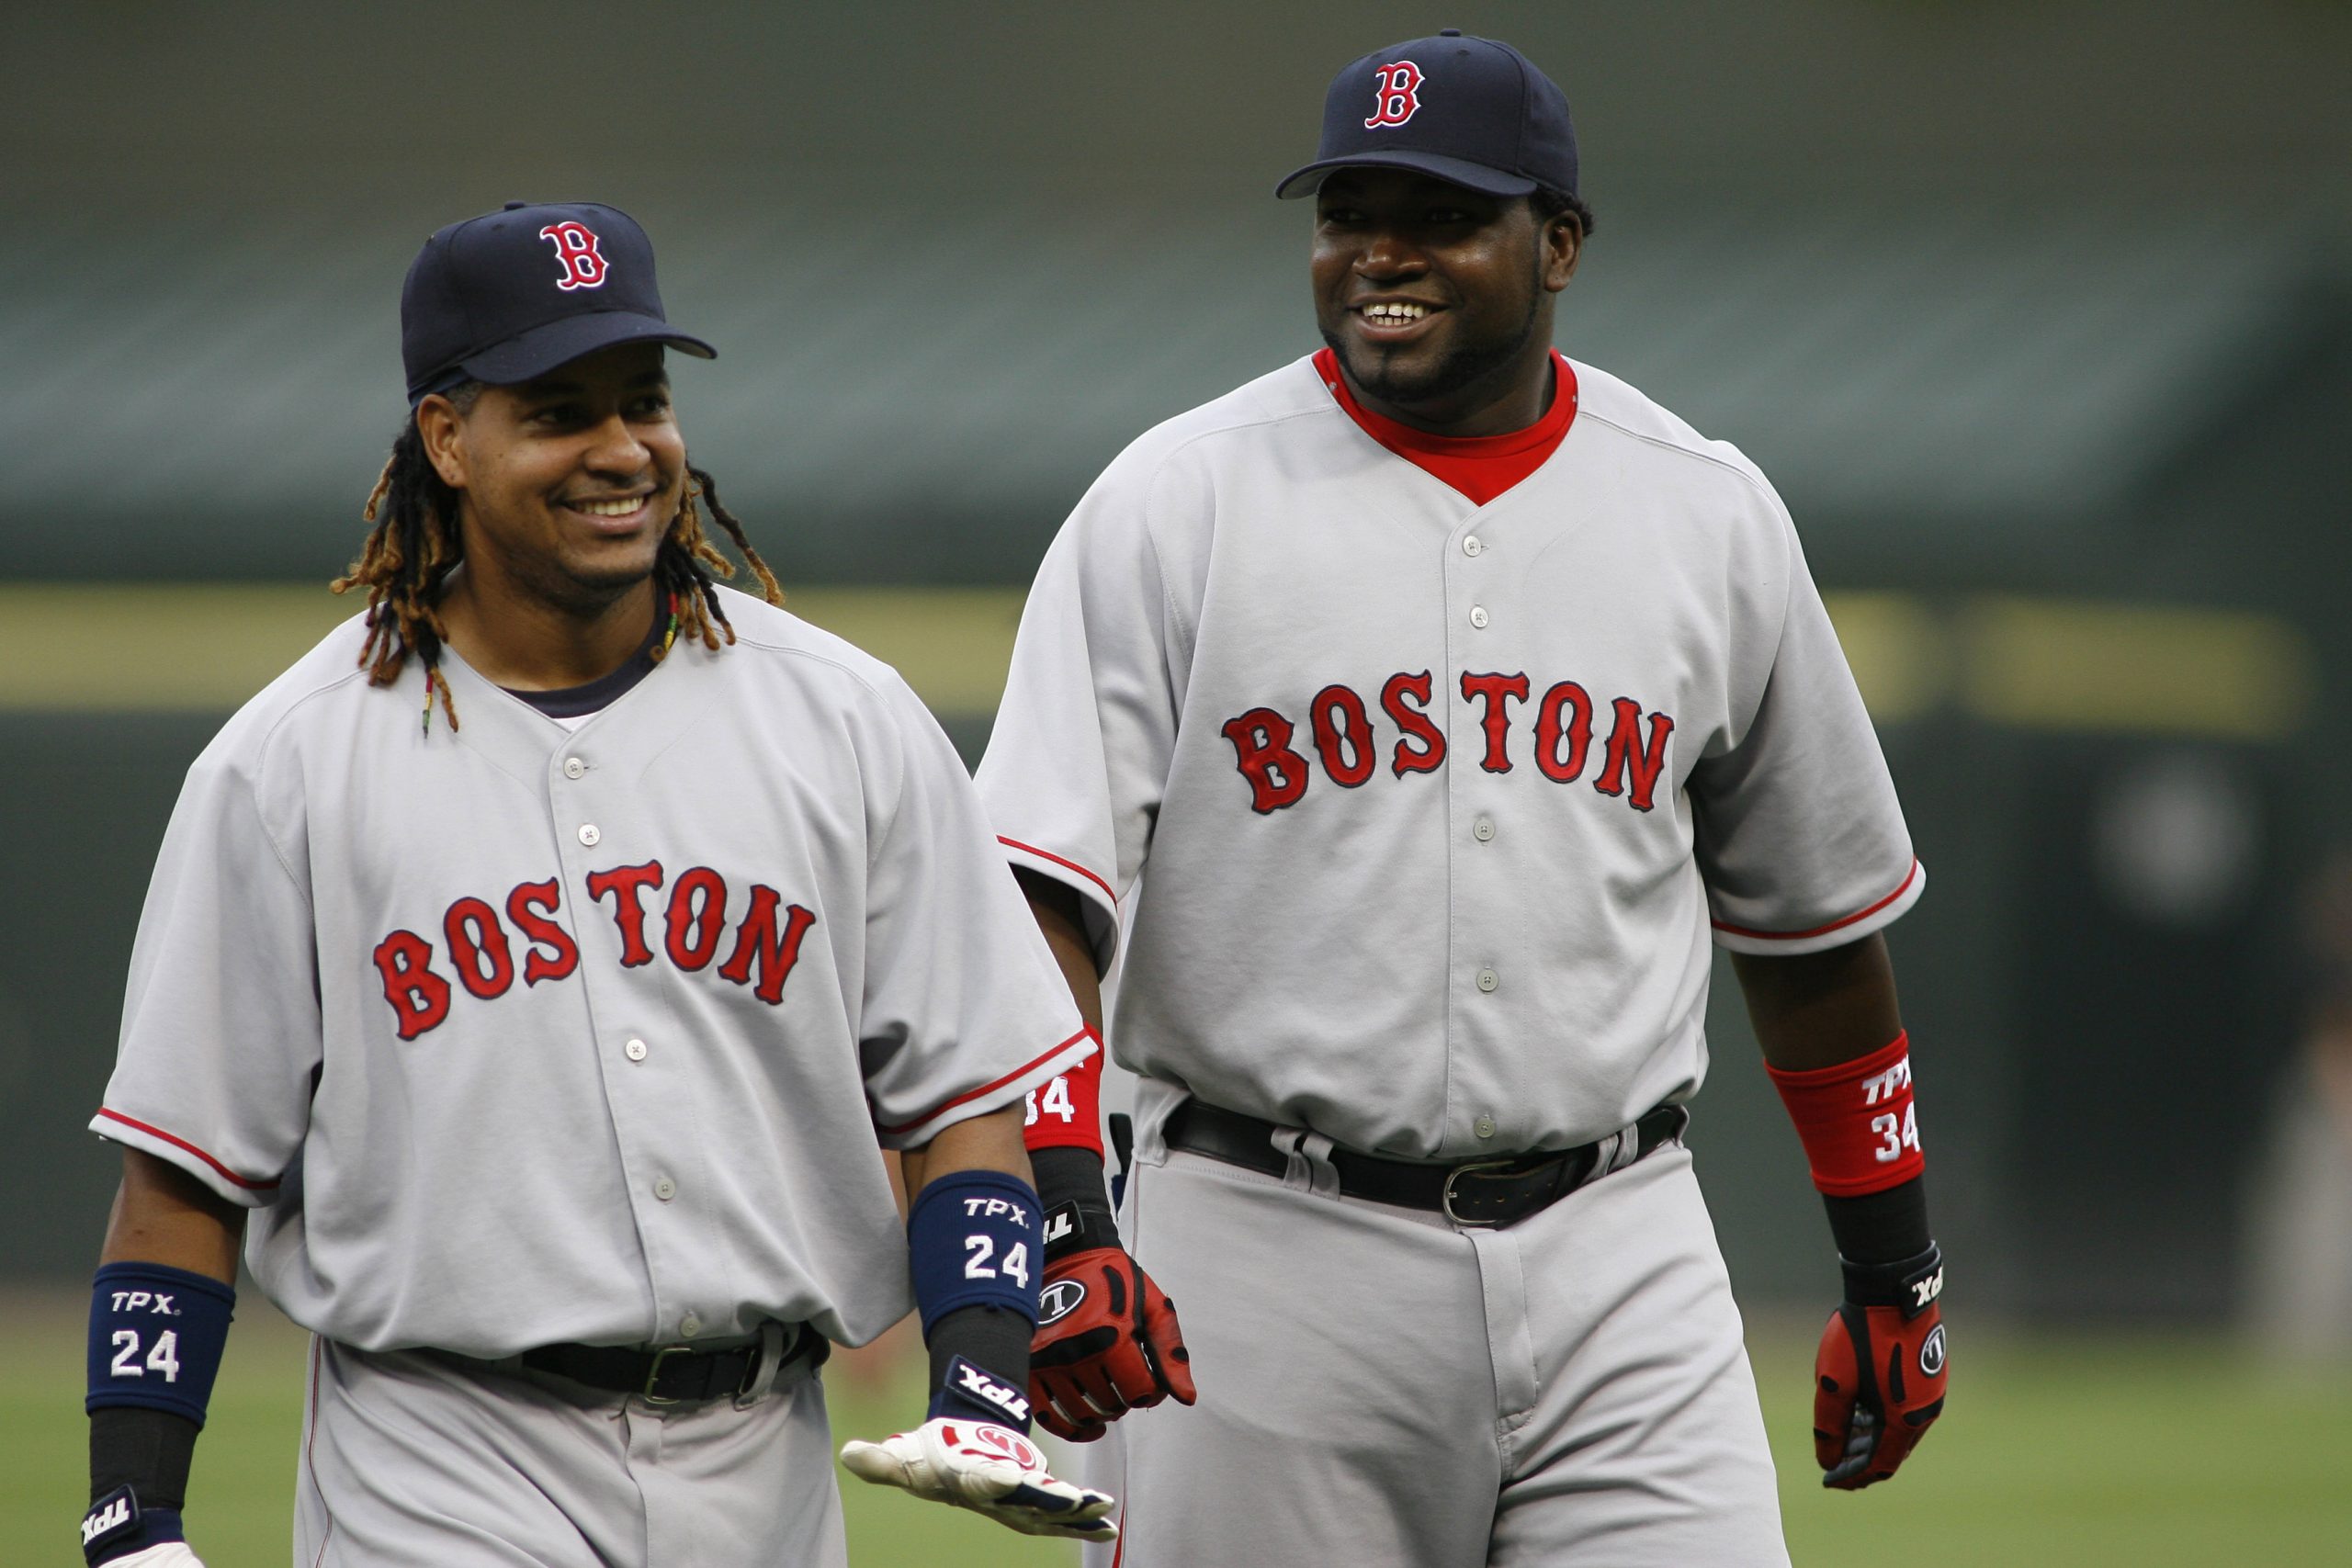 David Ortiz Pained That Former Red Sox Teammate Manny Ramirez Isn’t Joining Him in the Hall of Fame